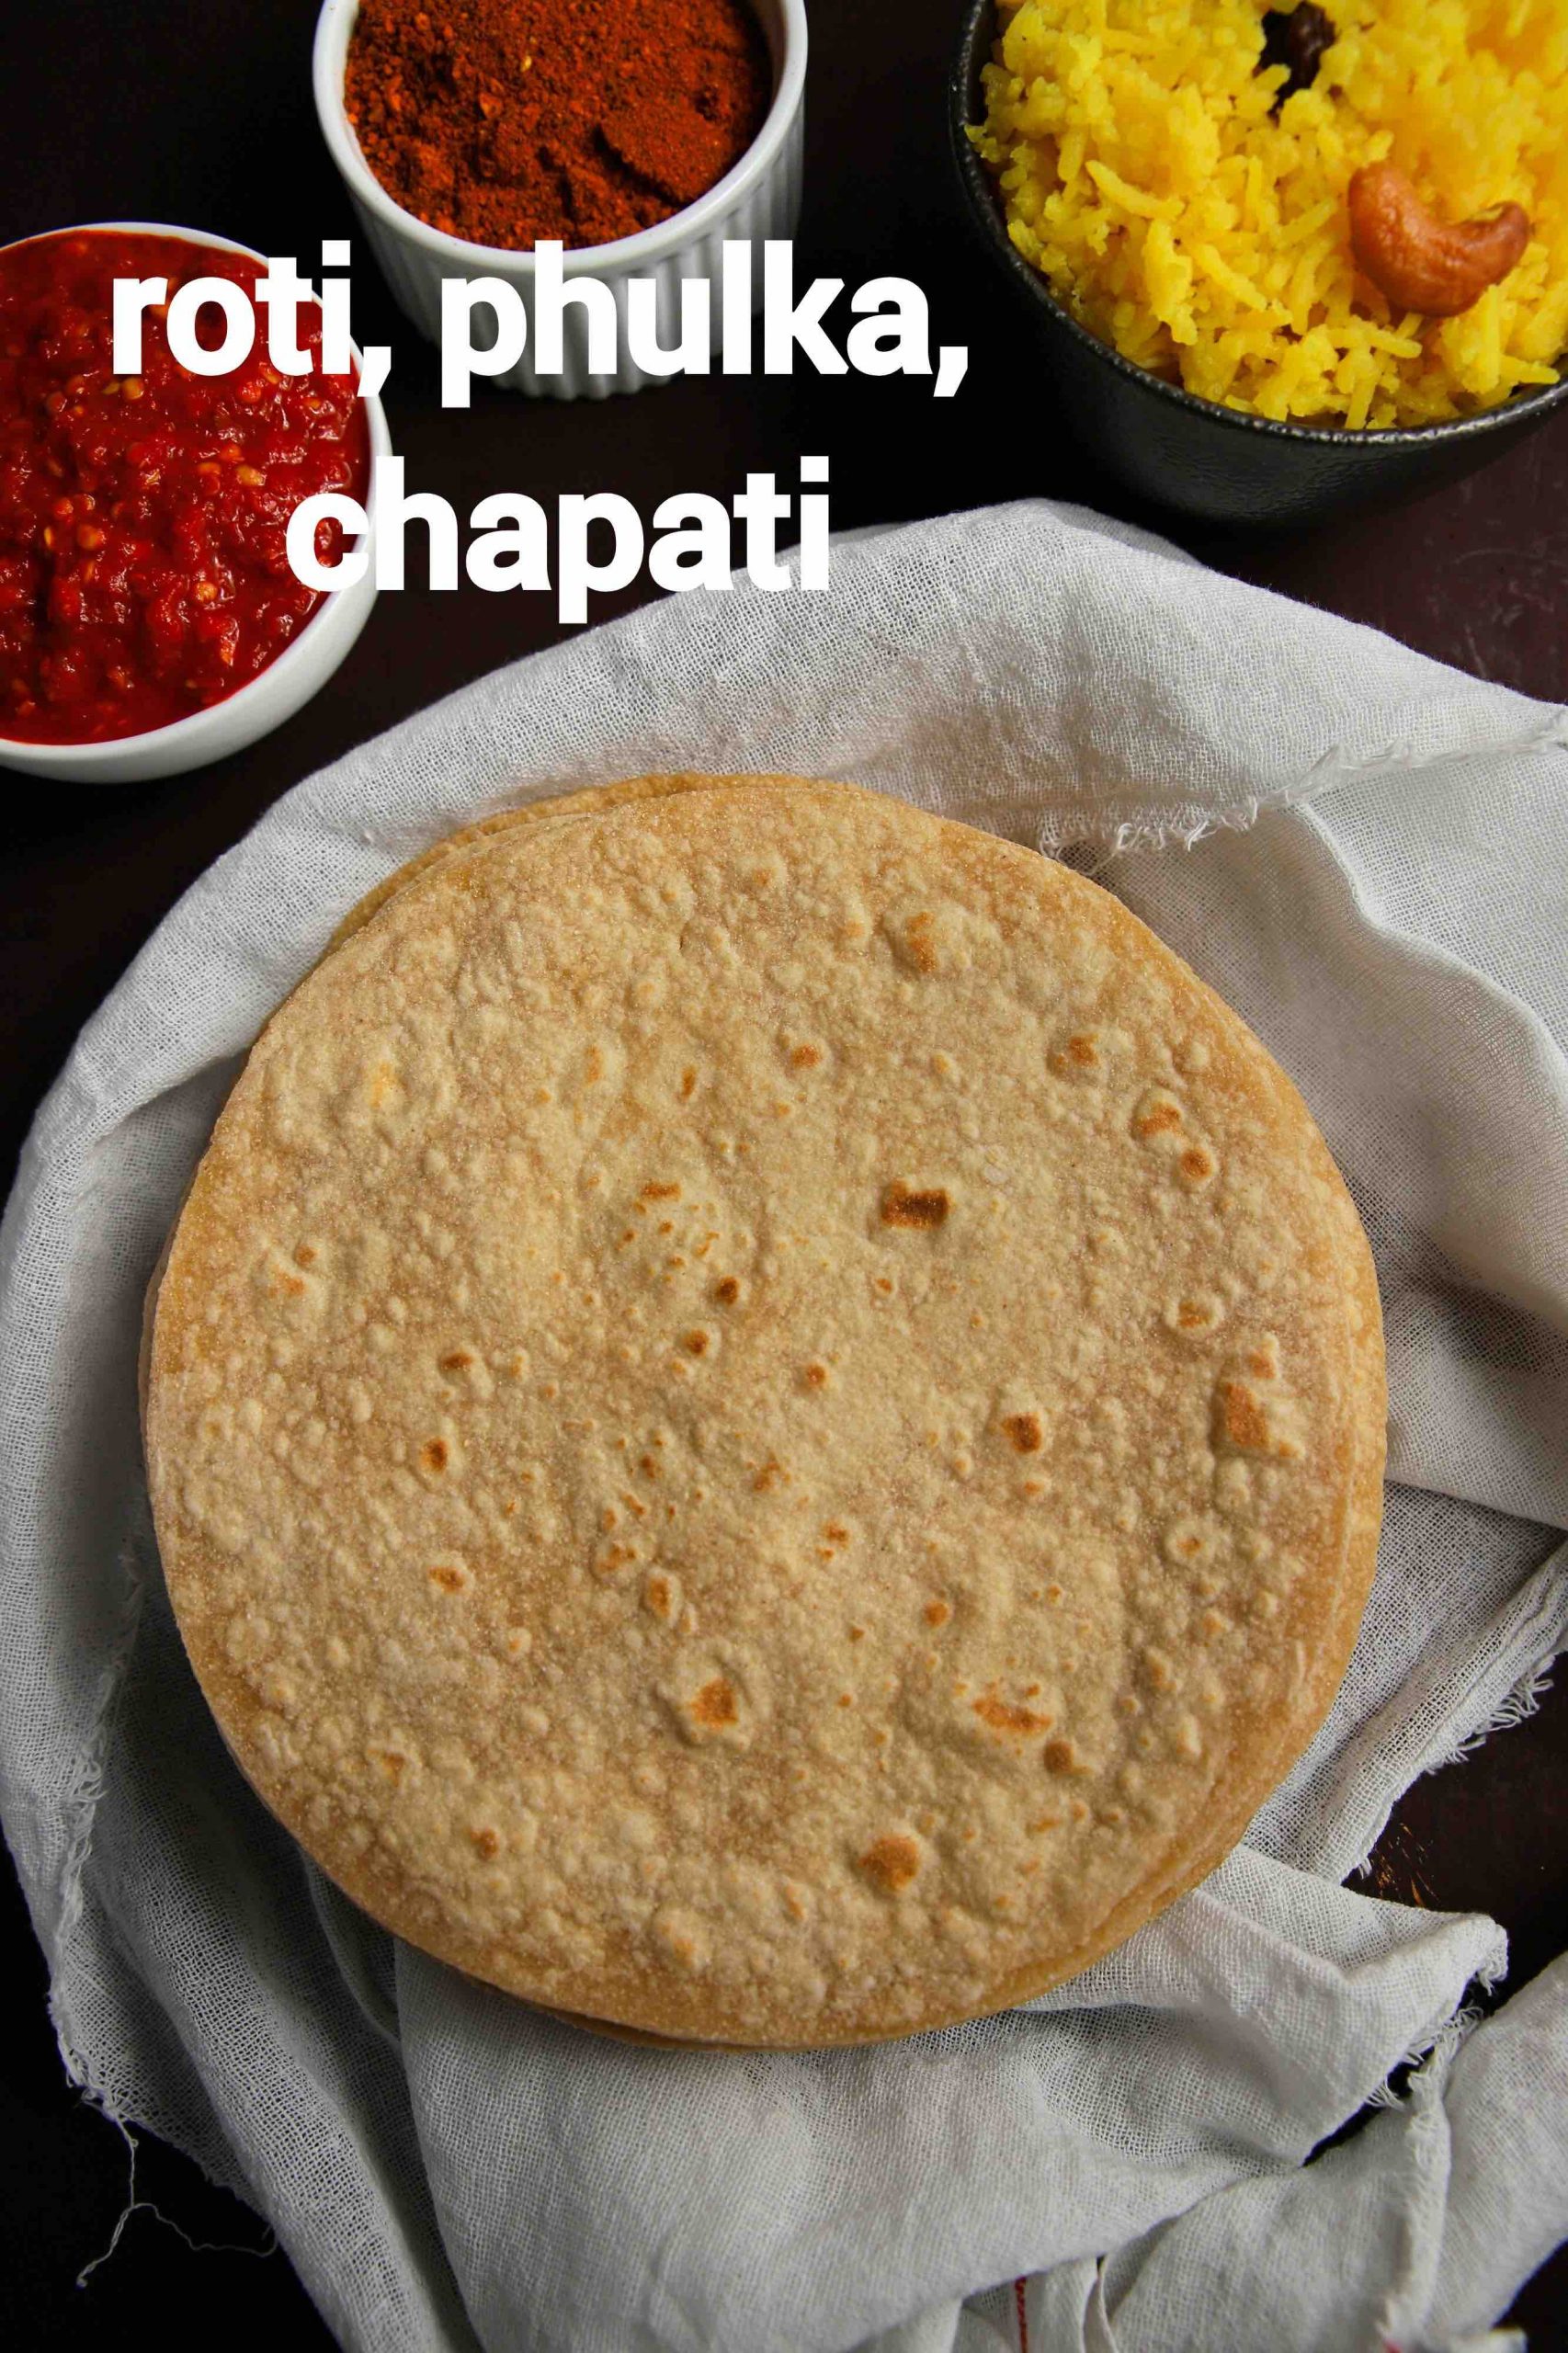 How to make chapati soft